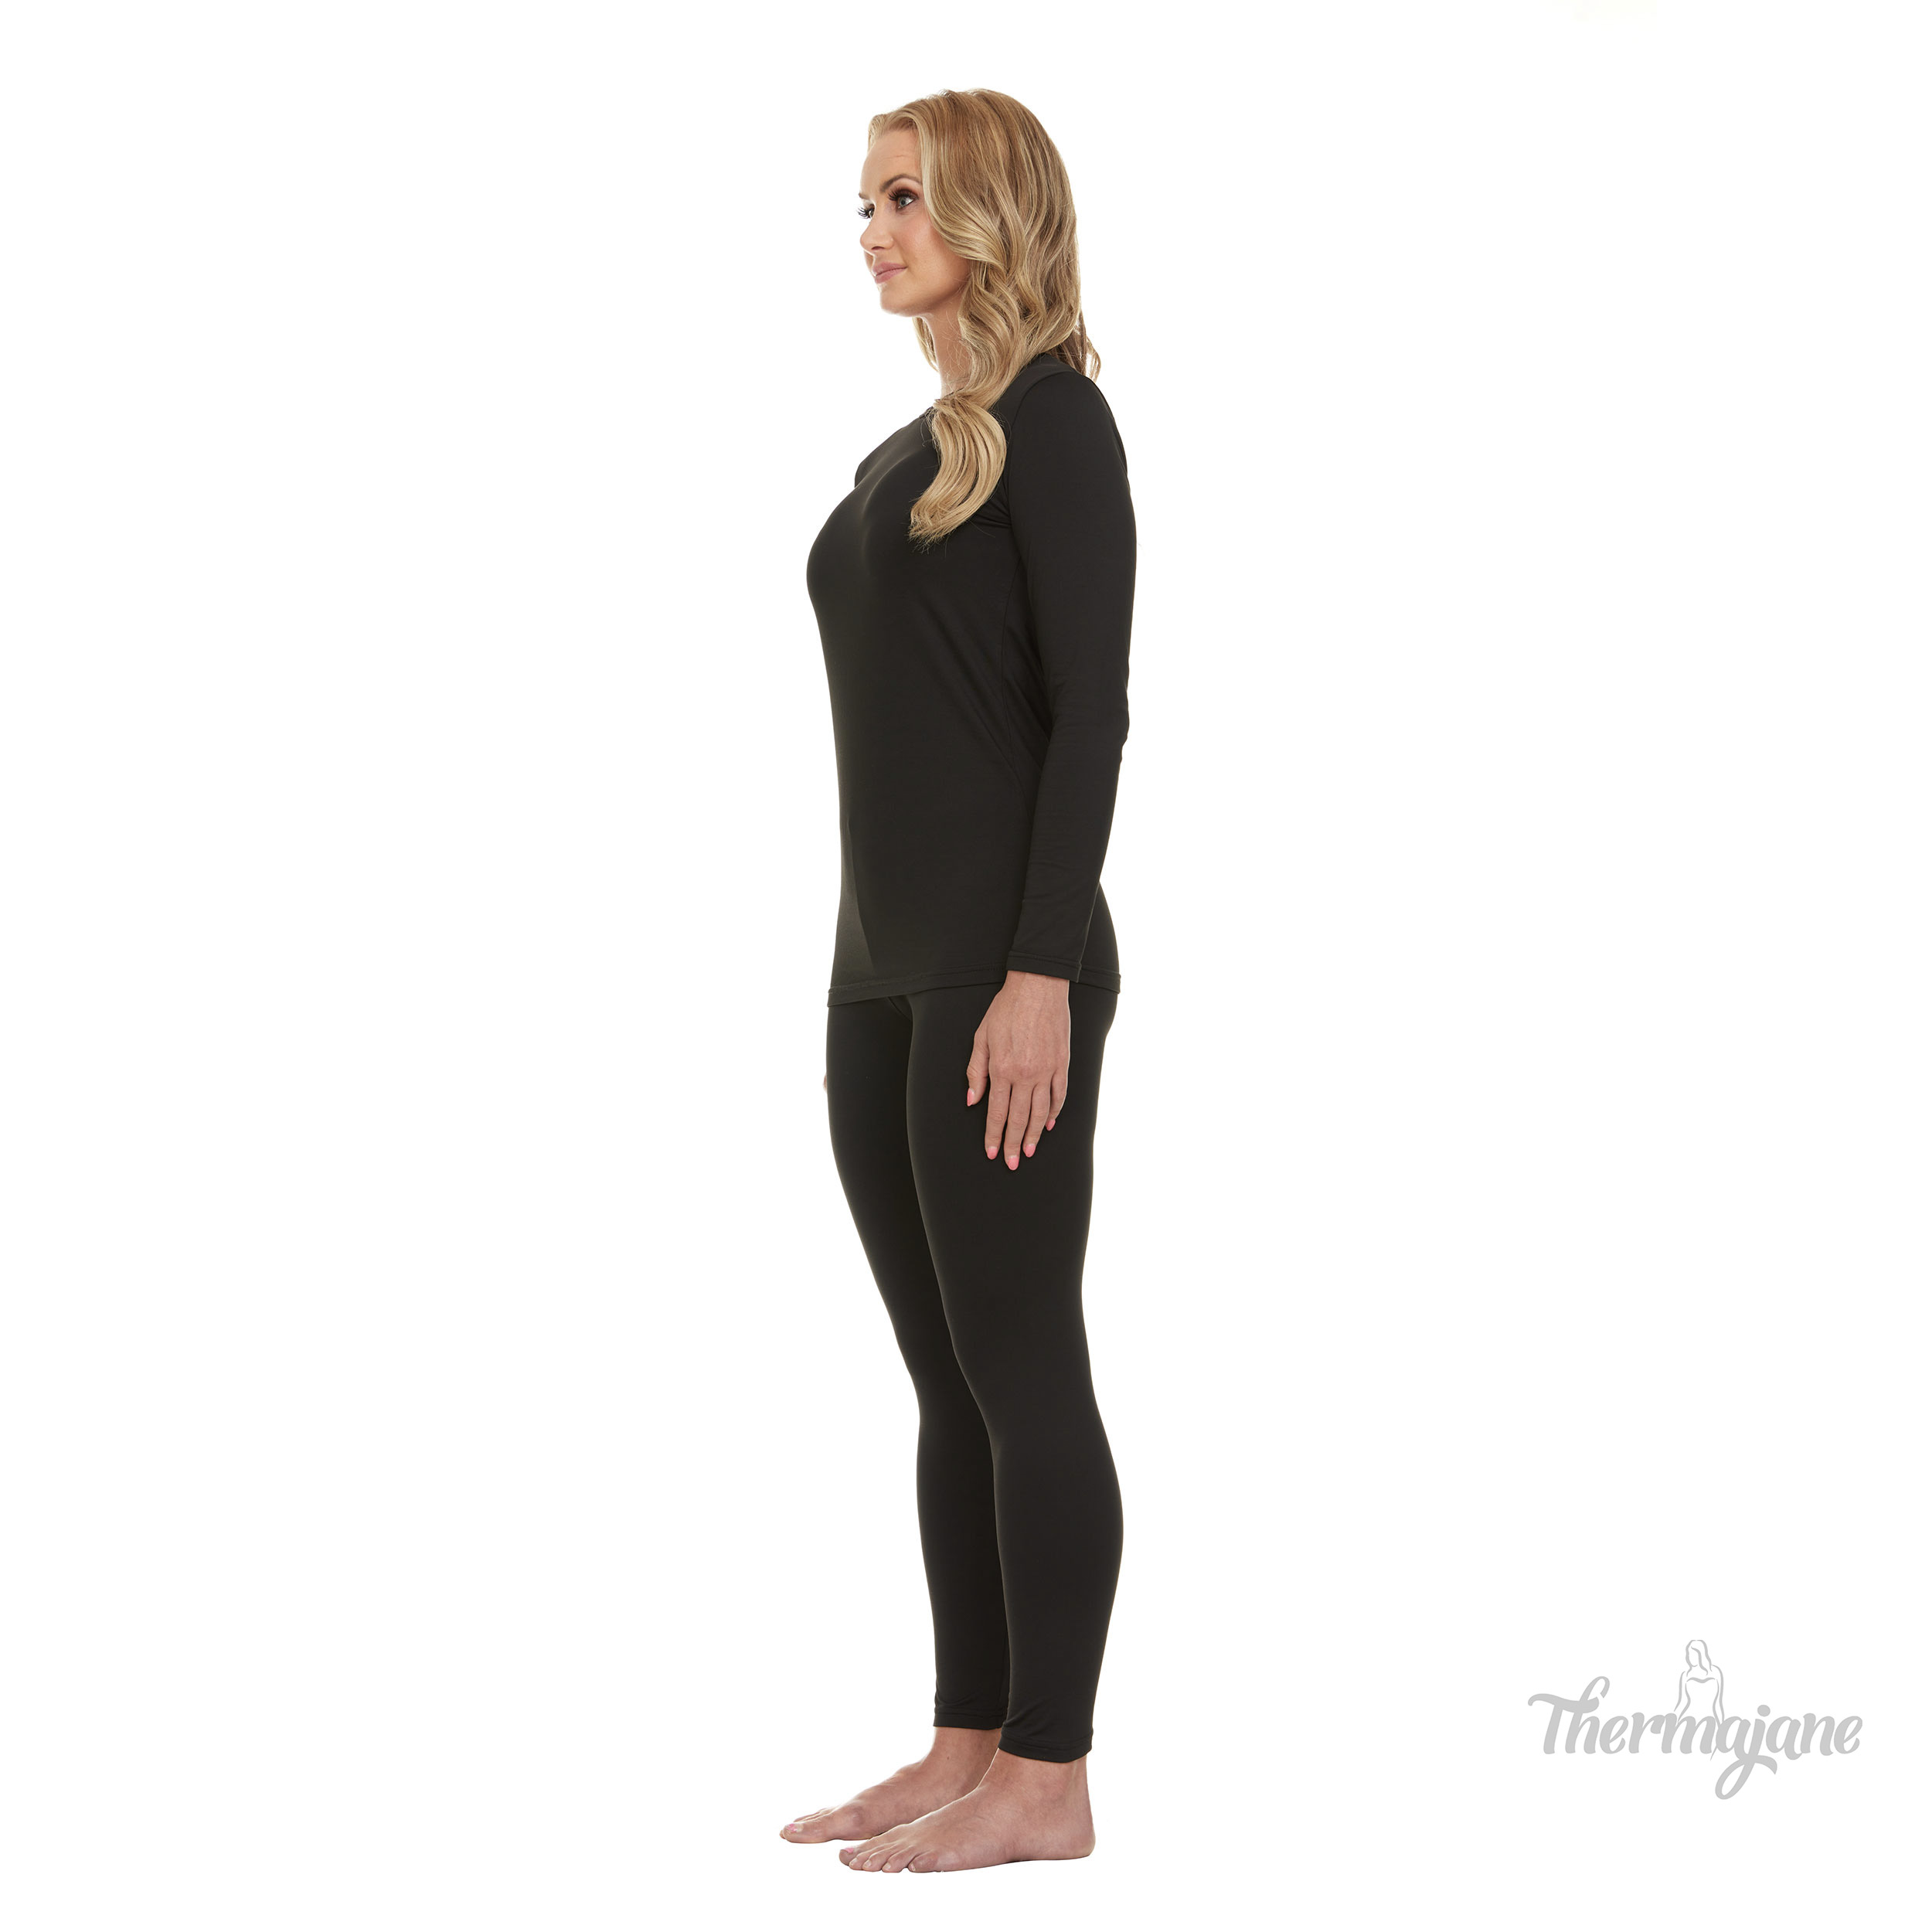 Seamless Winter Thermajane Thermal Underwear Set Set For Men And Women Sexy  And Warm Clothing From Baizhanji, $10.96